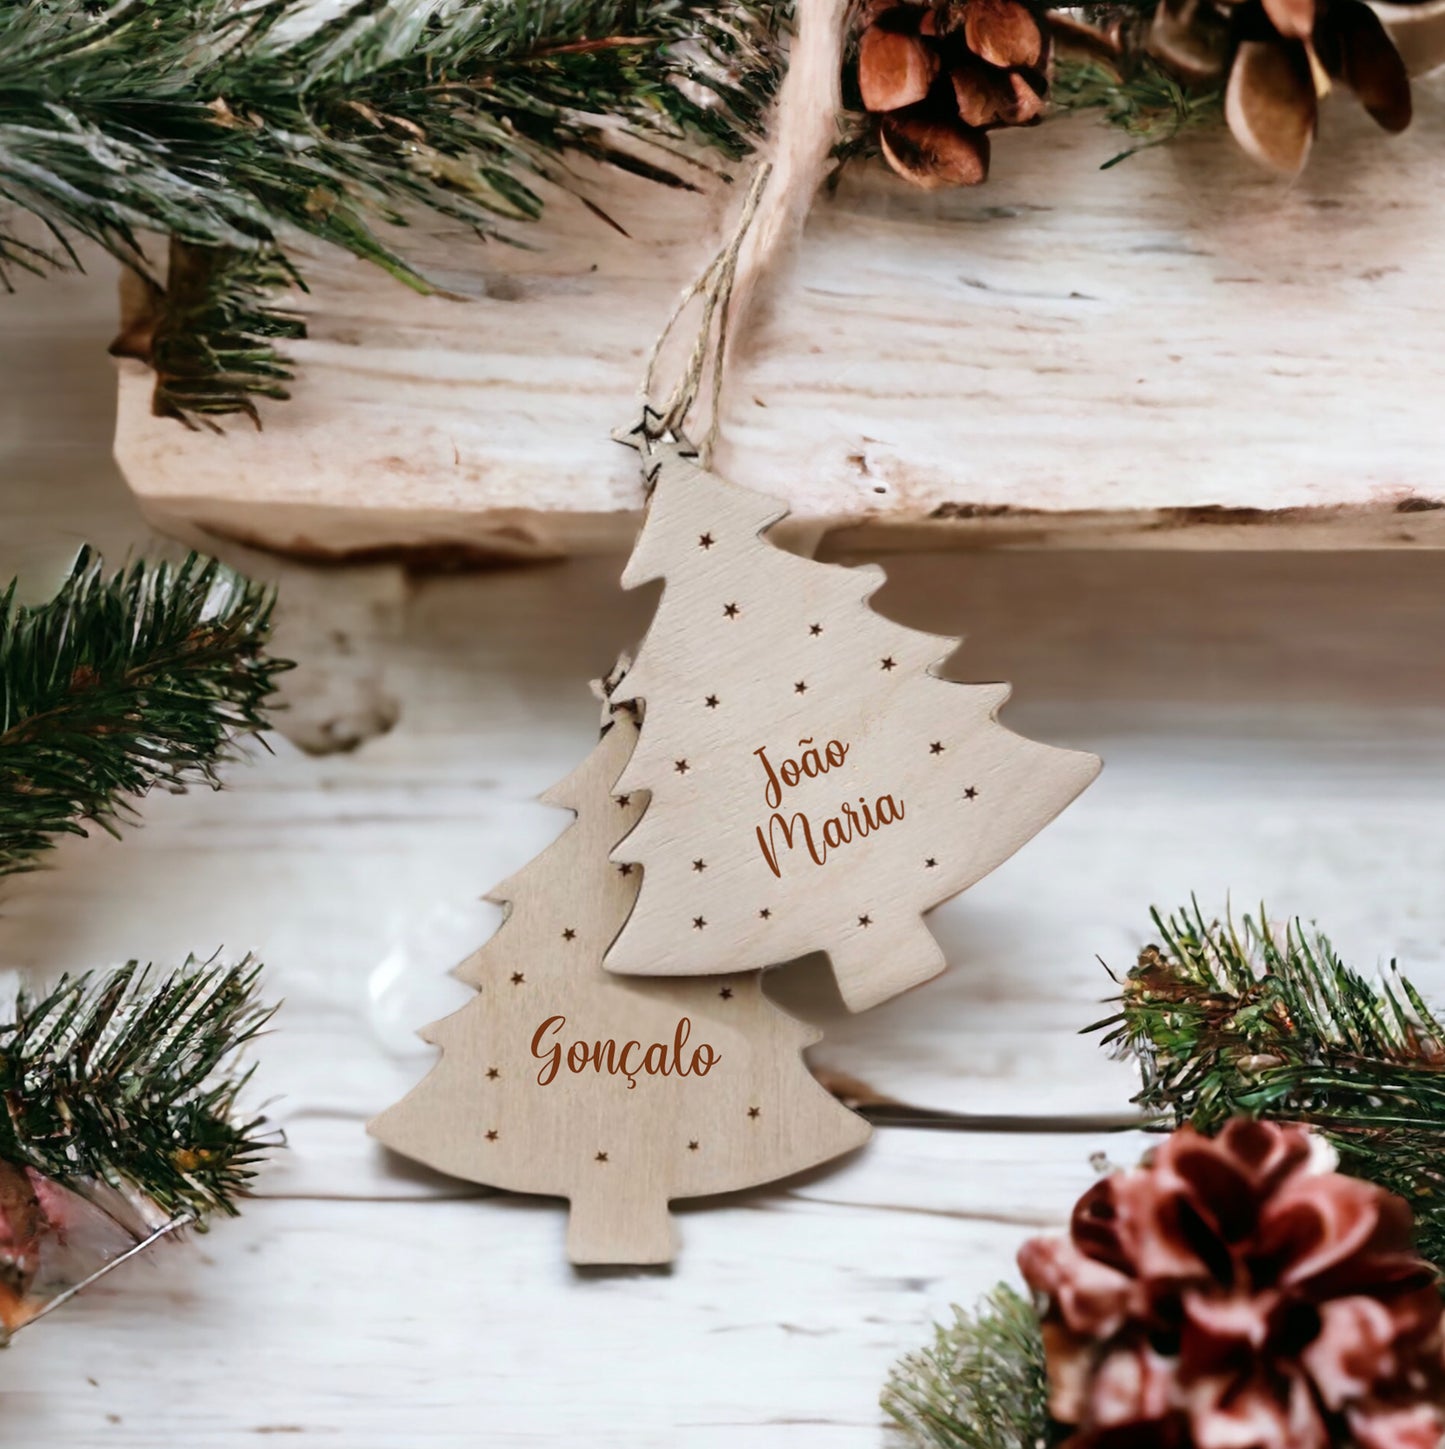 Personalized Wooden Christmas Ornament with Names Engraved - Free Shipping